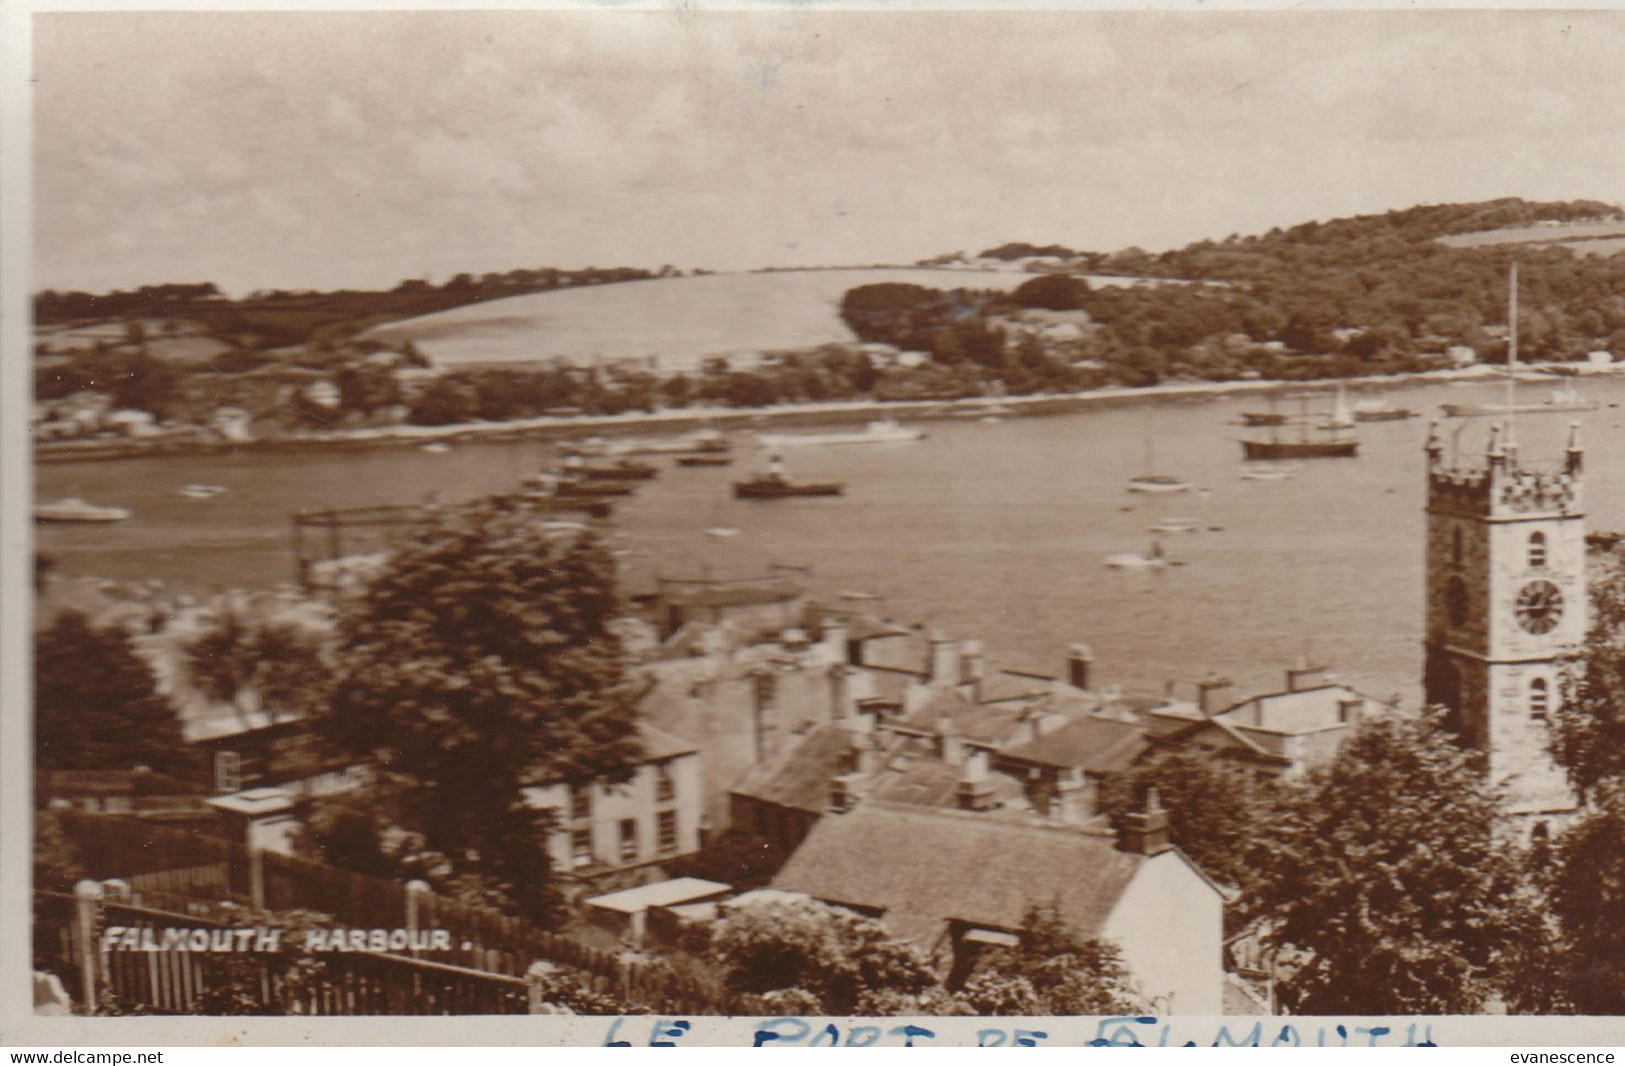 Falmouth : The Harbour   ///  Réf.  Aout   22 //  N° 21.631 - Falmouth